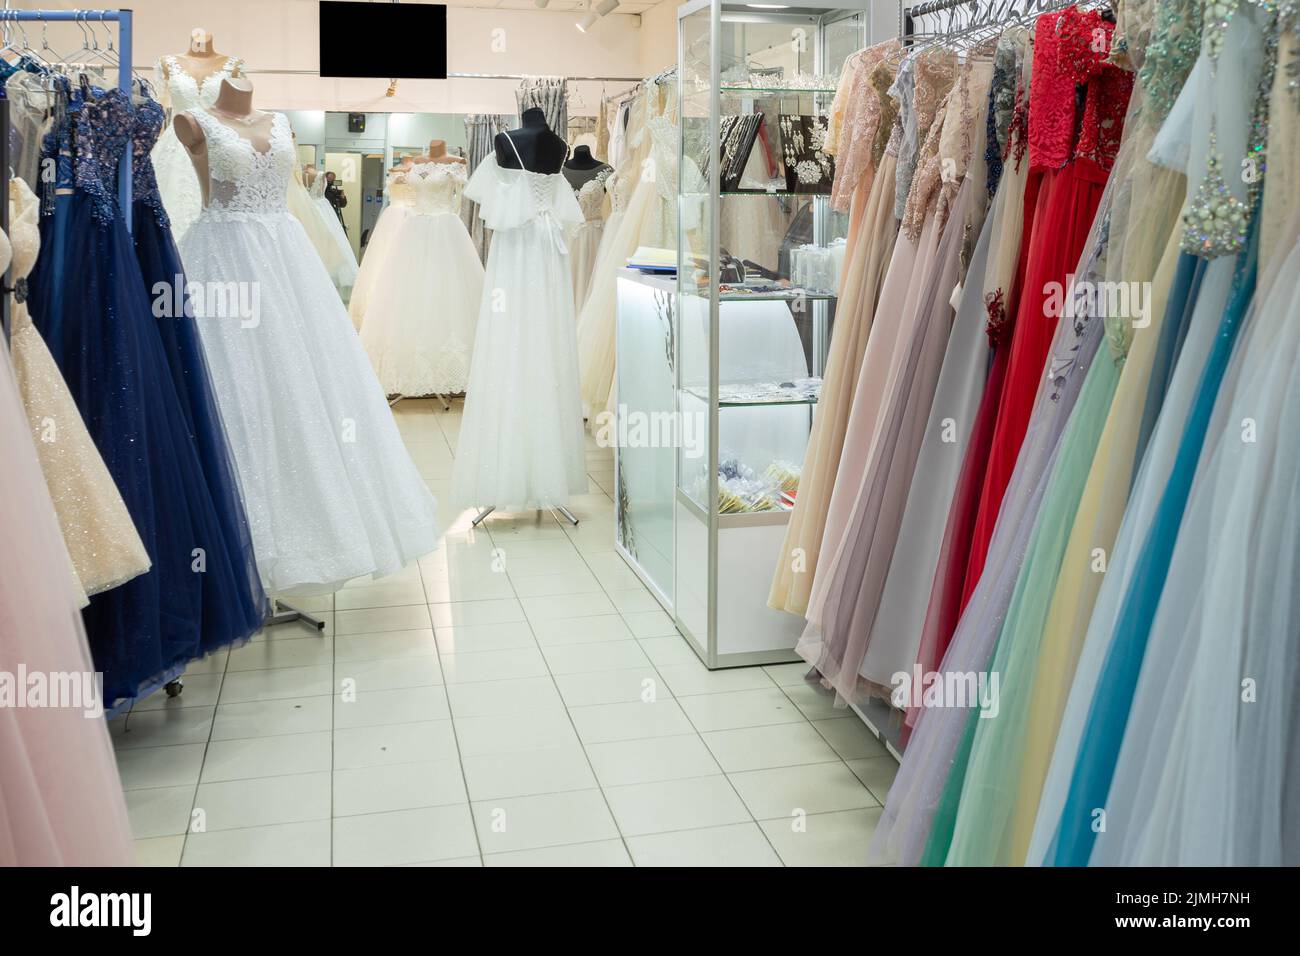 Many different evening and wedding dresses on a hanger in a general store Stock Photo